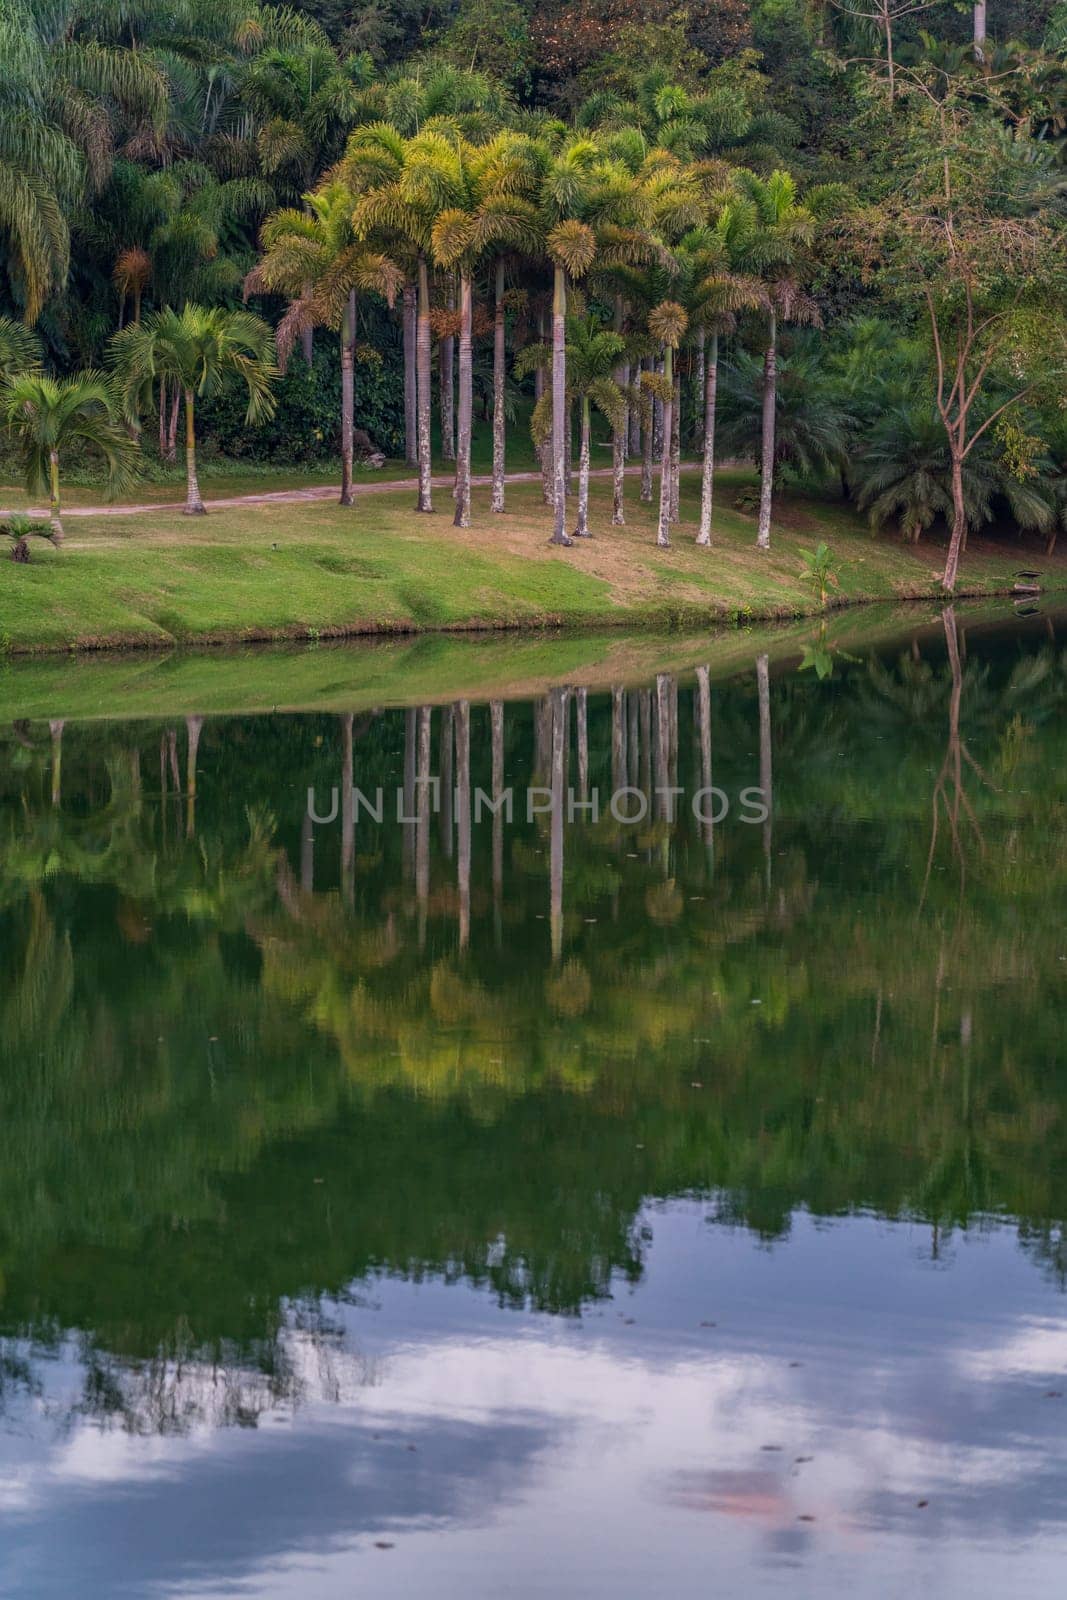 Serene Tropical Palm Trees Reflecting on Water Surface by FerradalFCG